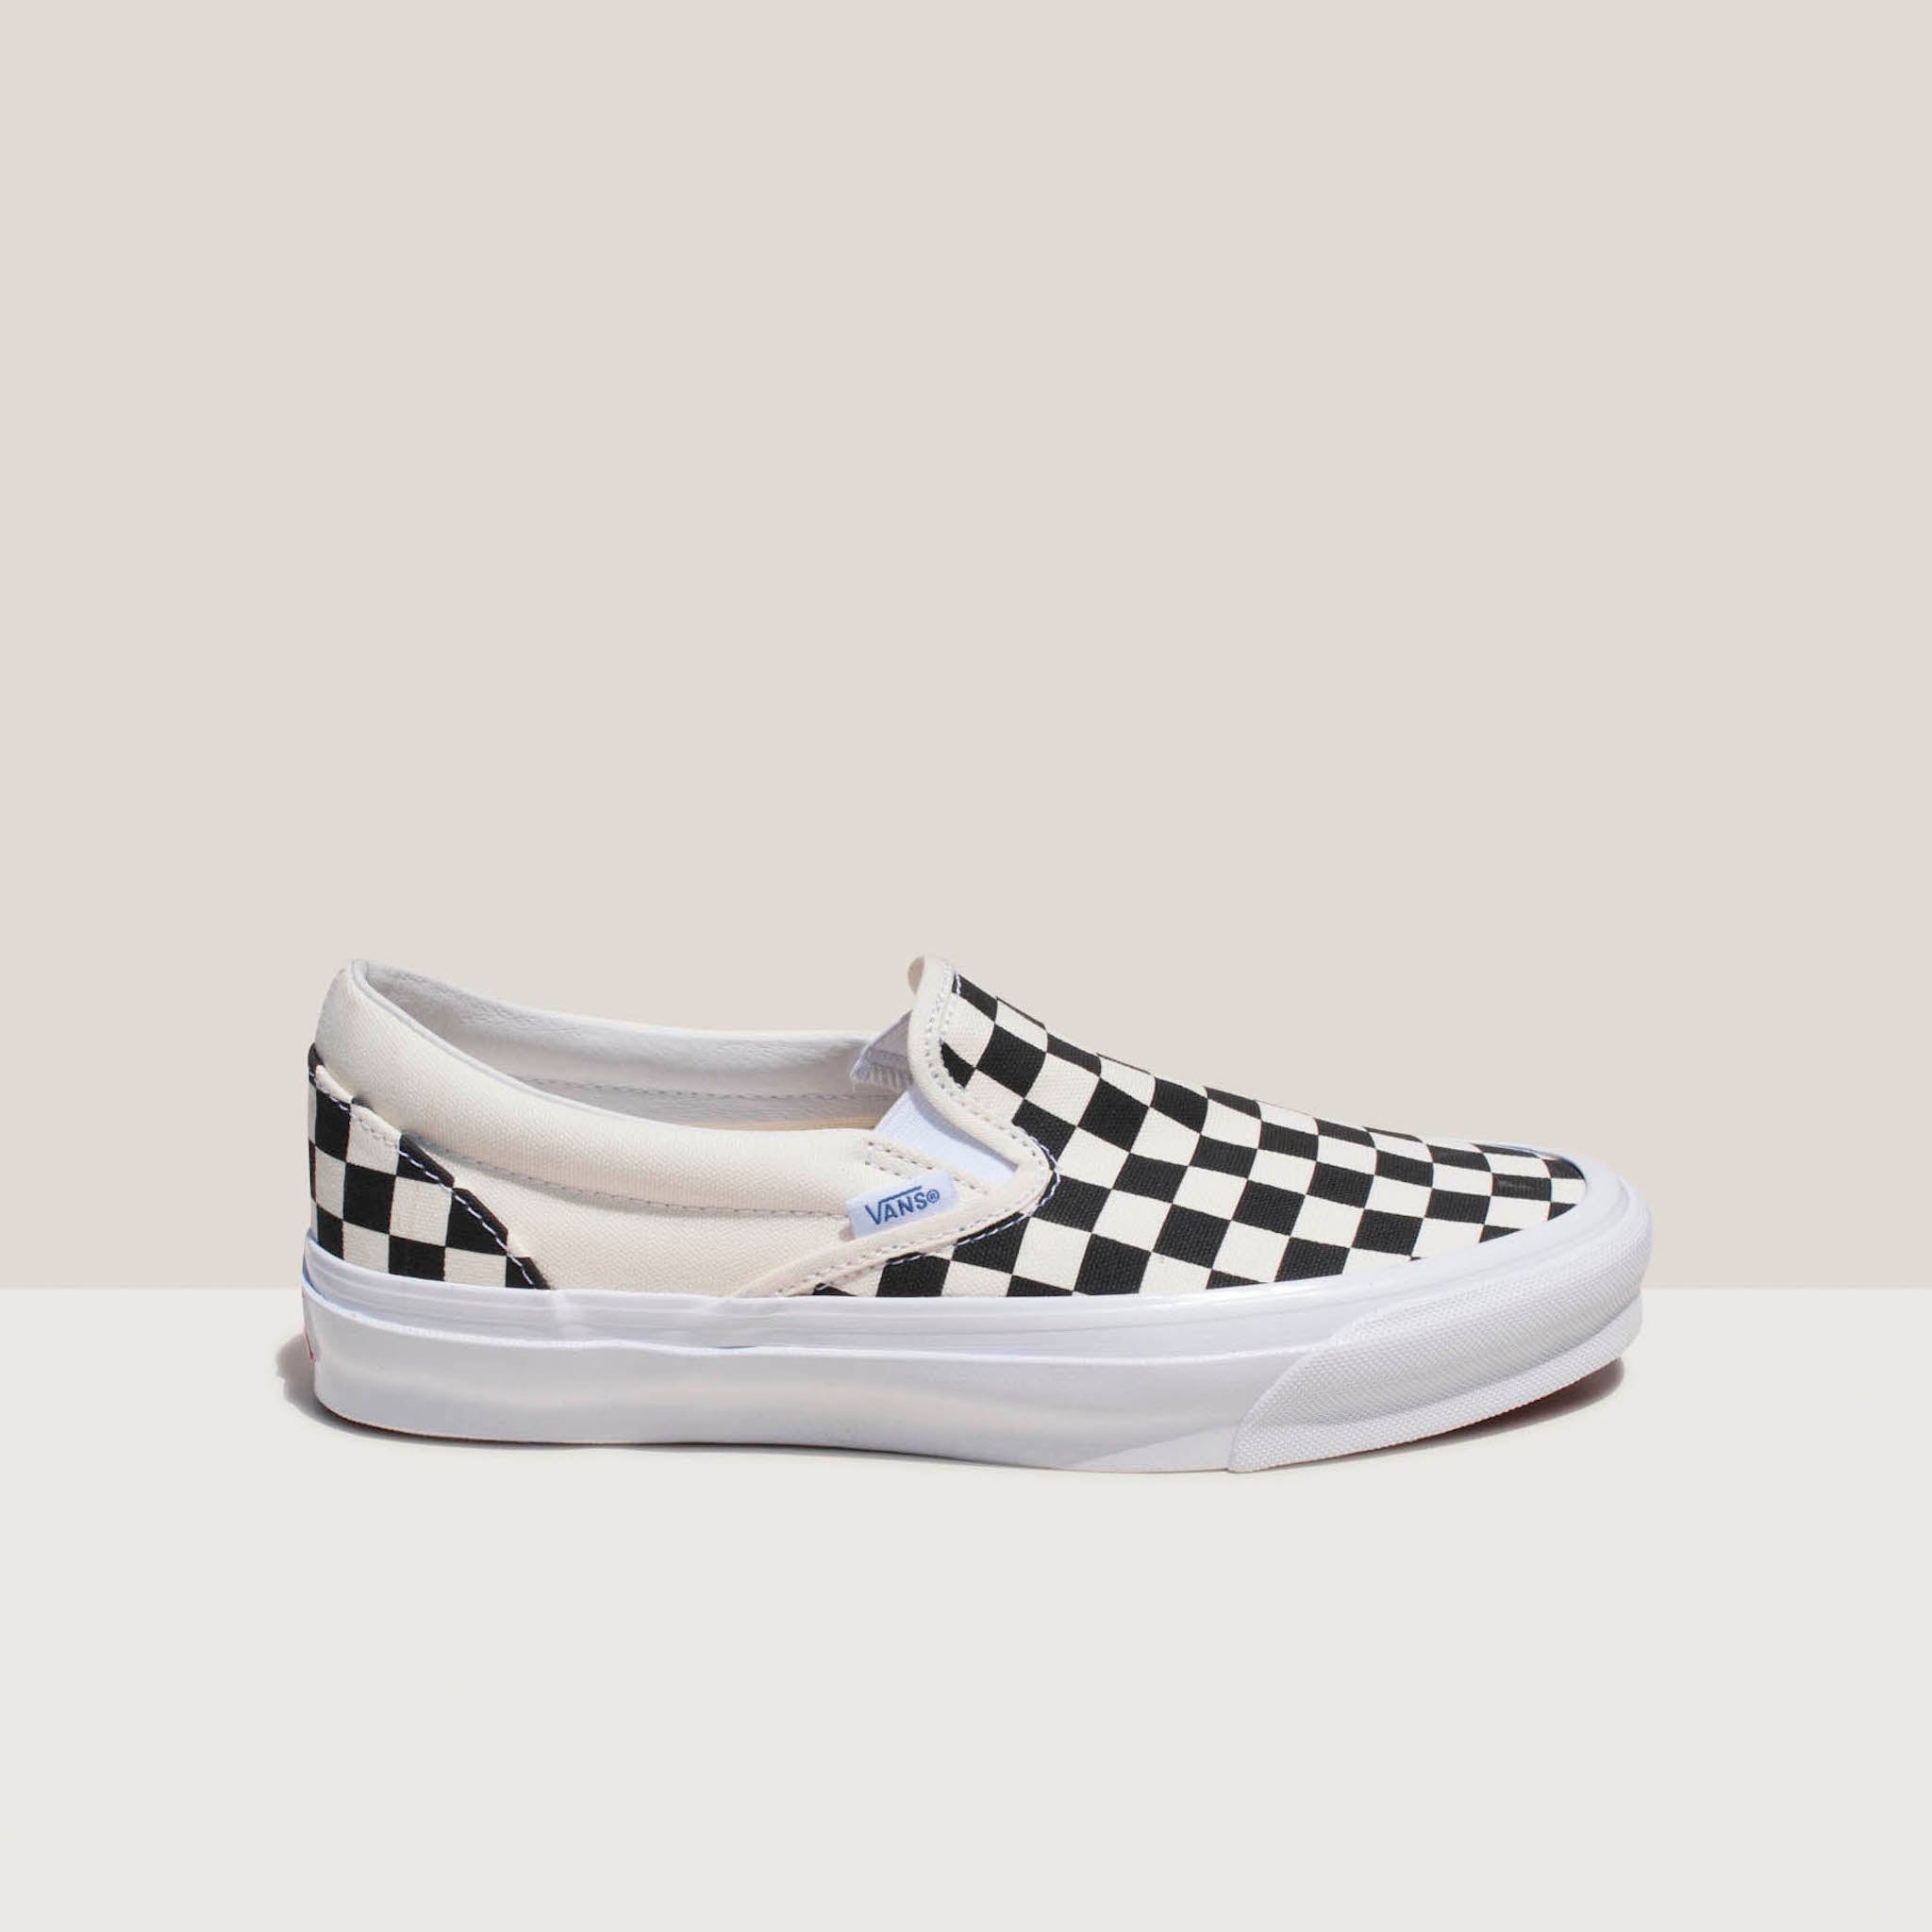 by Vans - OG Classic Slip-On - Checkerboard | available LCD